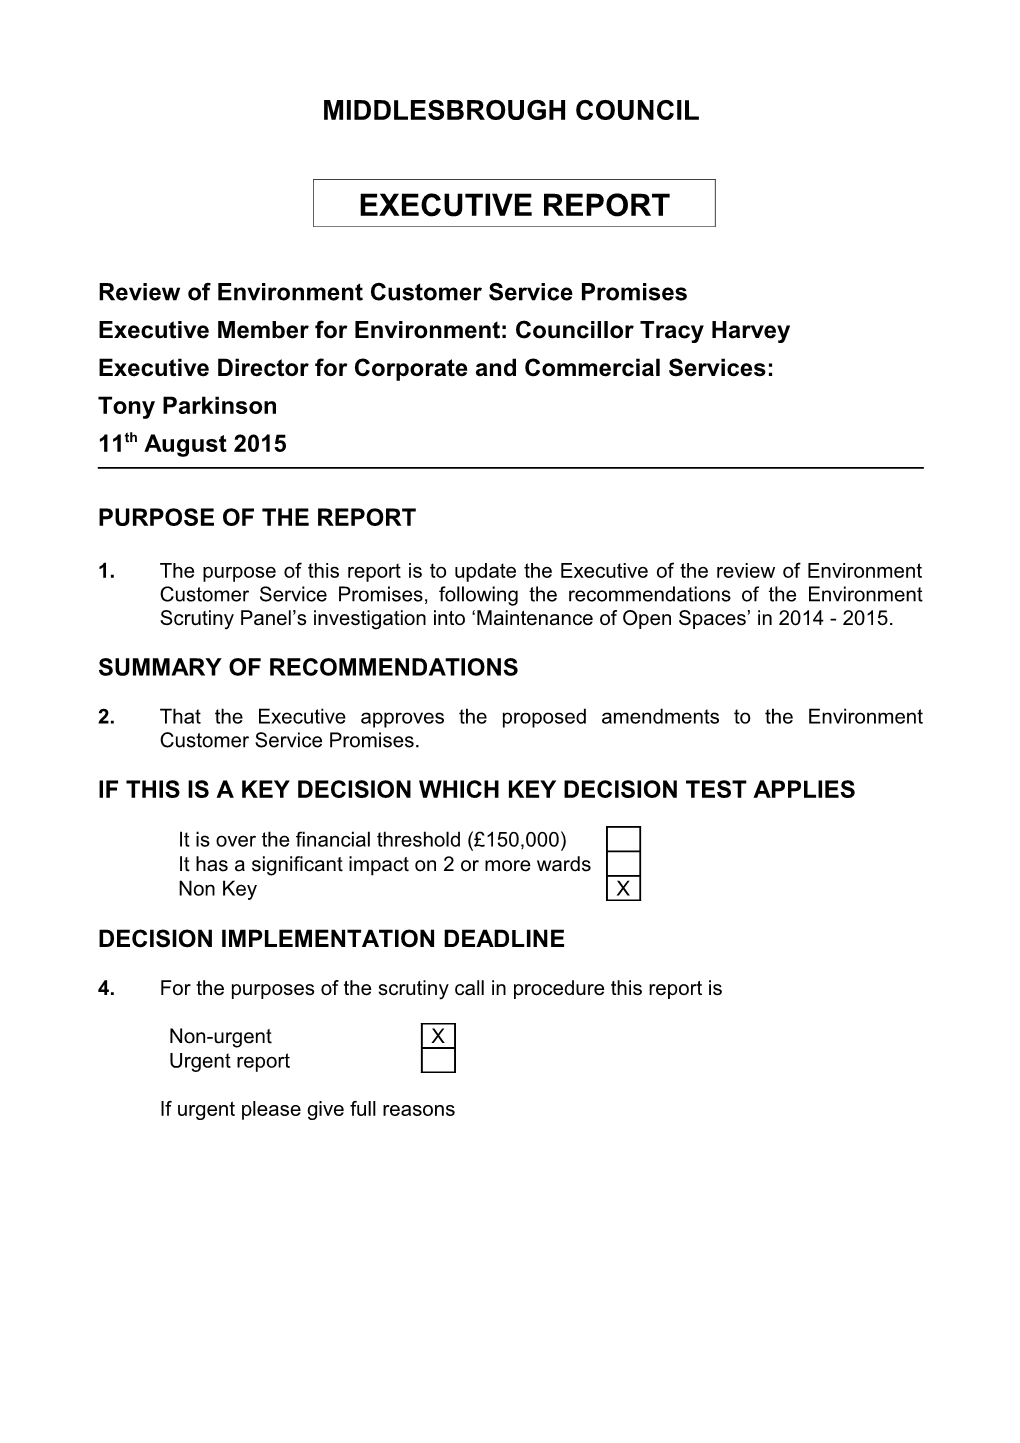 Review of Environment Customer Service Promises